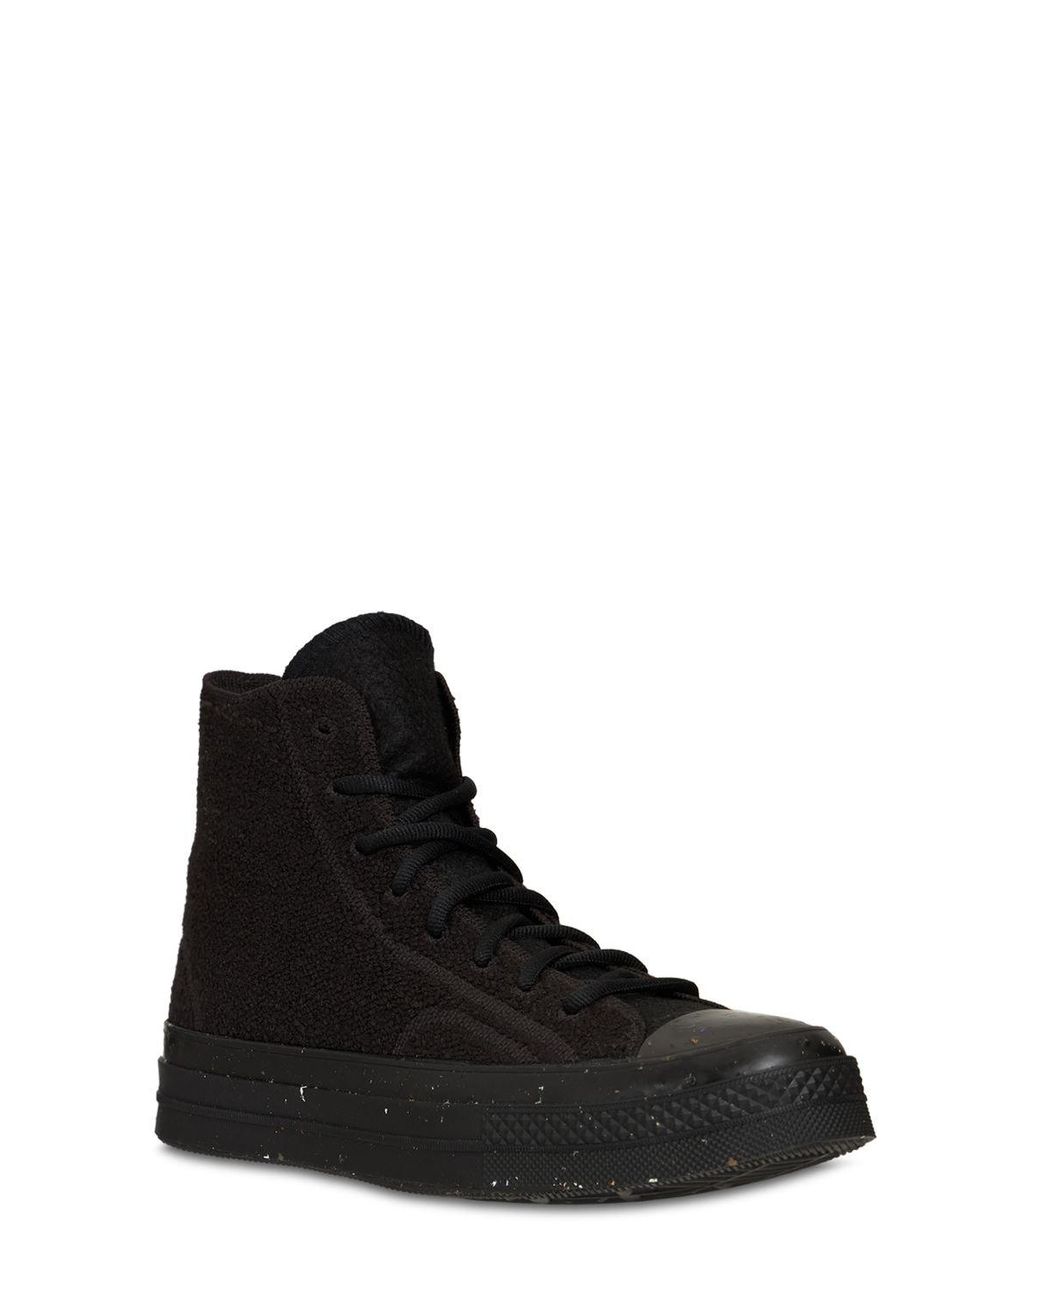 Urban Outfitters Converse Chuck 70 Renew Knit High Top Sneaker Black 10M  12W NEW